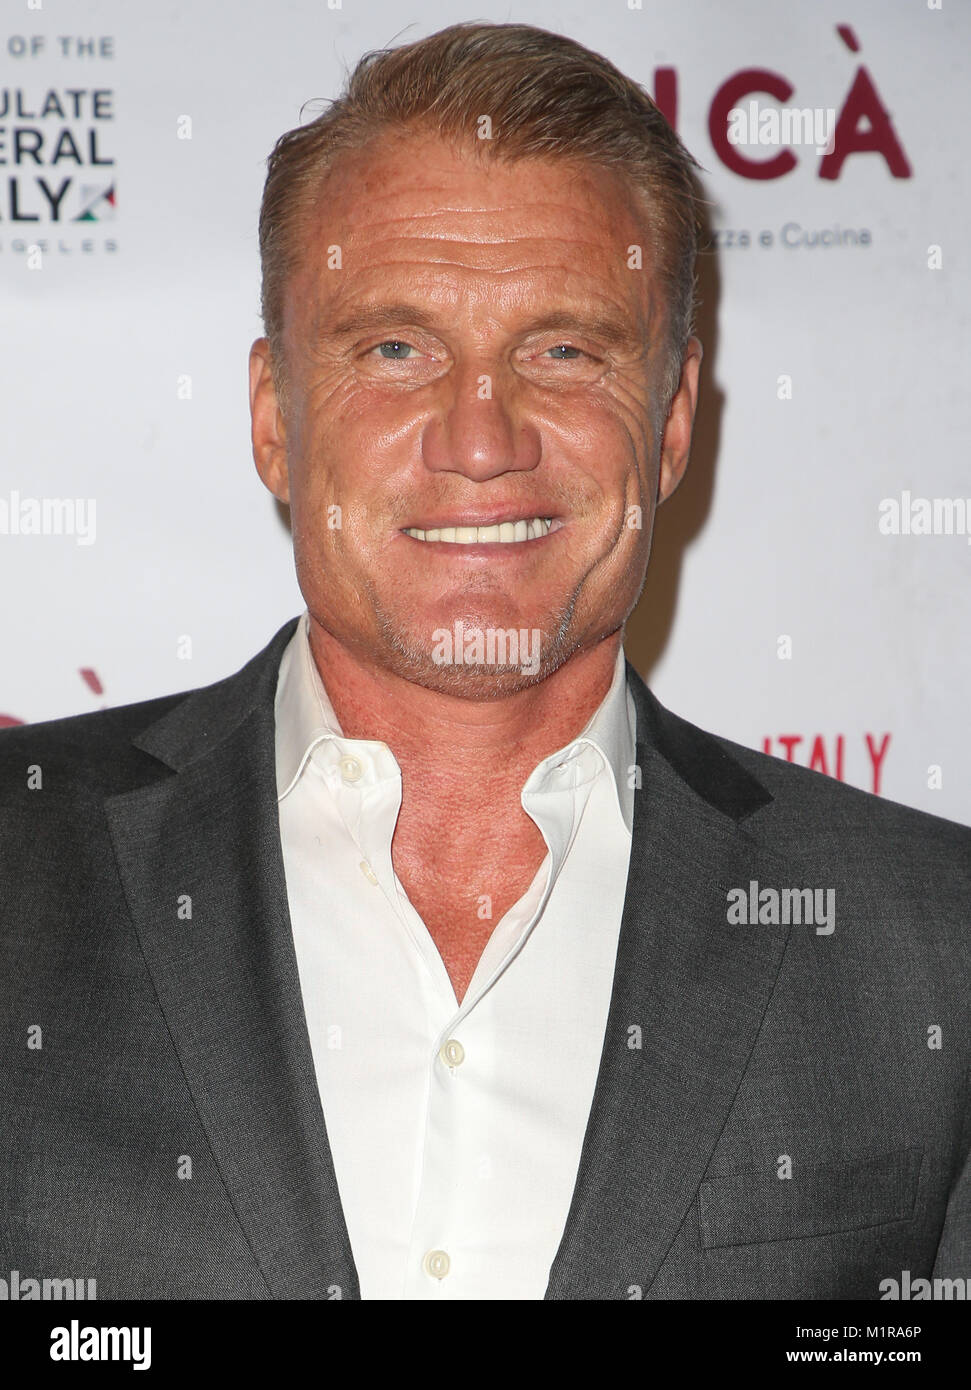 Los Angeles, Ca, USA. 31st Jan, 2018. Dolph Lundgren, at the Filming In Italy In Los Angeles festival Honoring Monica Bellucci with the Filming In Italy and The Italian Institute of Culture Los Angeles Creativity Award and screening of On The Milky Road at Harmony Gold in Los Angeles, California on January 31, 2018. Credit: Faye Sado/Media Punch/Alamy Live News Stock Photo